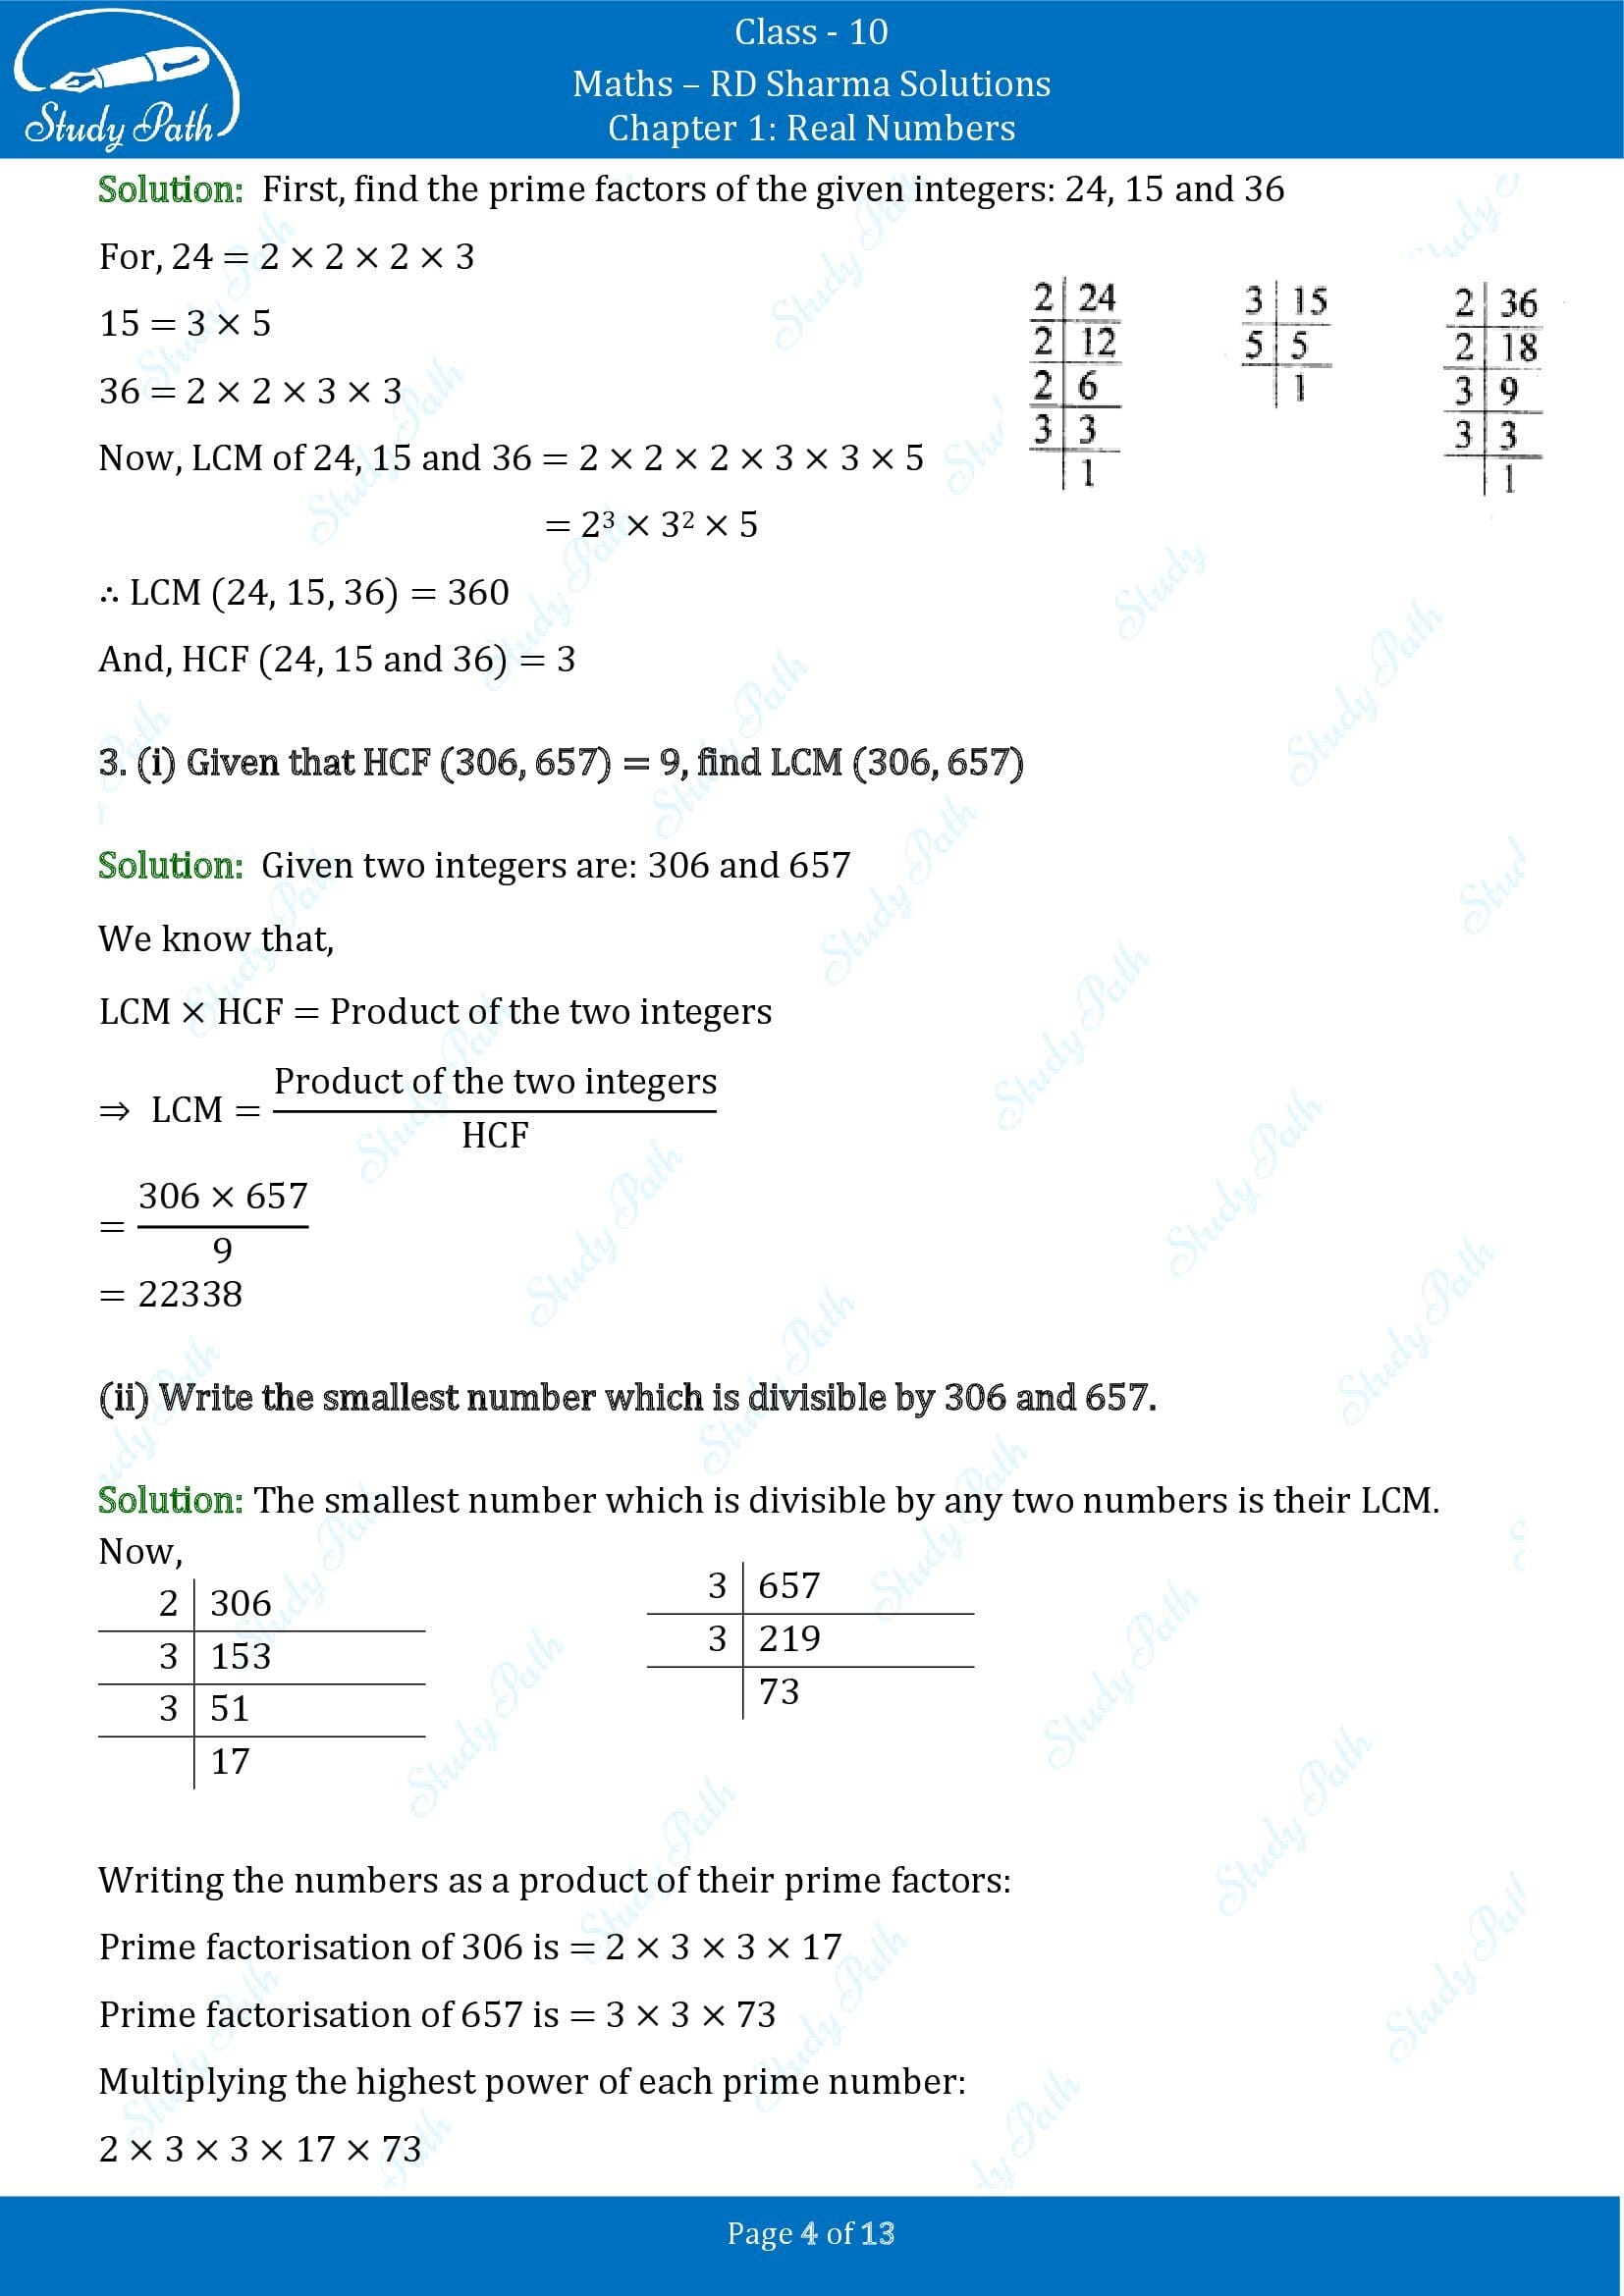 RD Sharma Solutions Class 10 Chapter 1 Real Numbers Exercise 1.4 00004